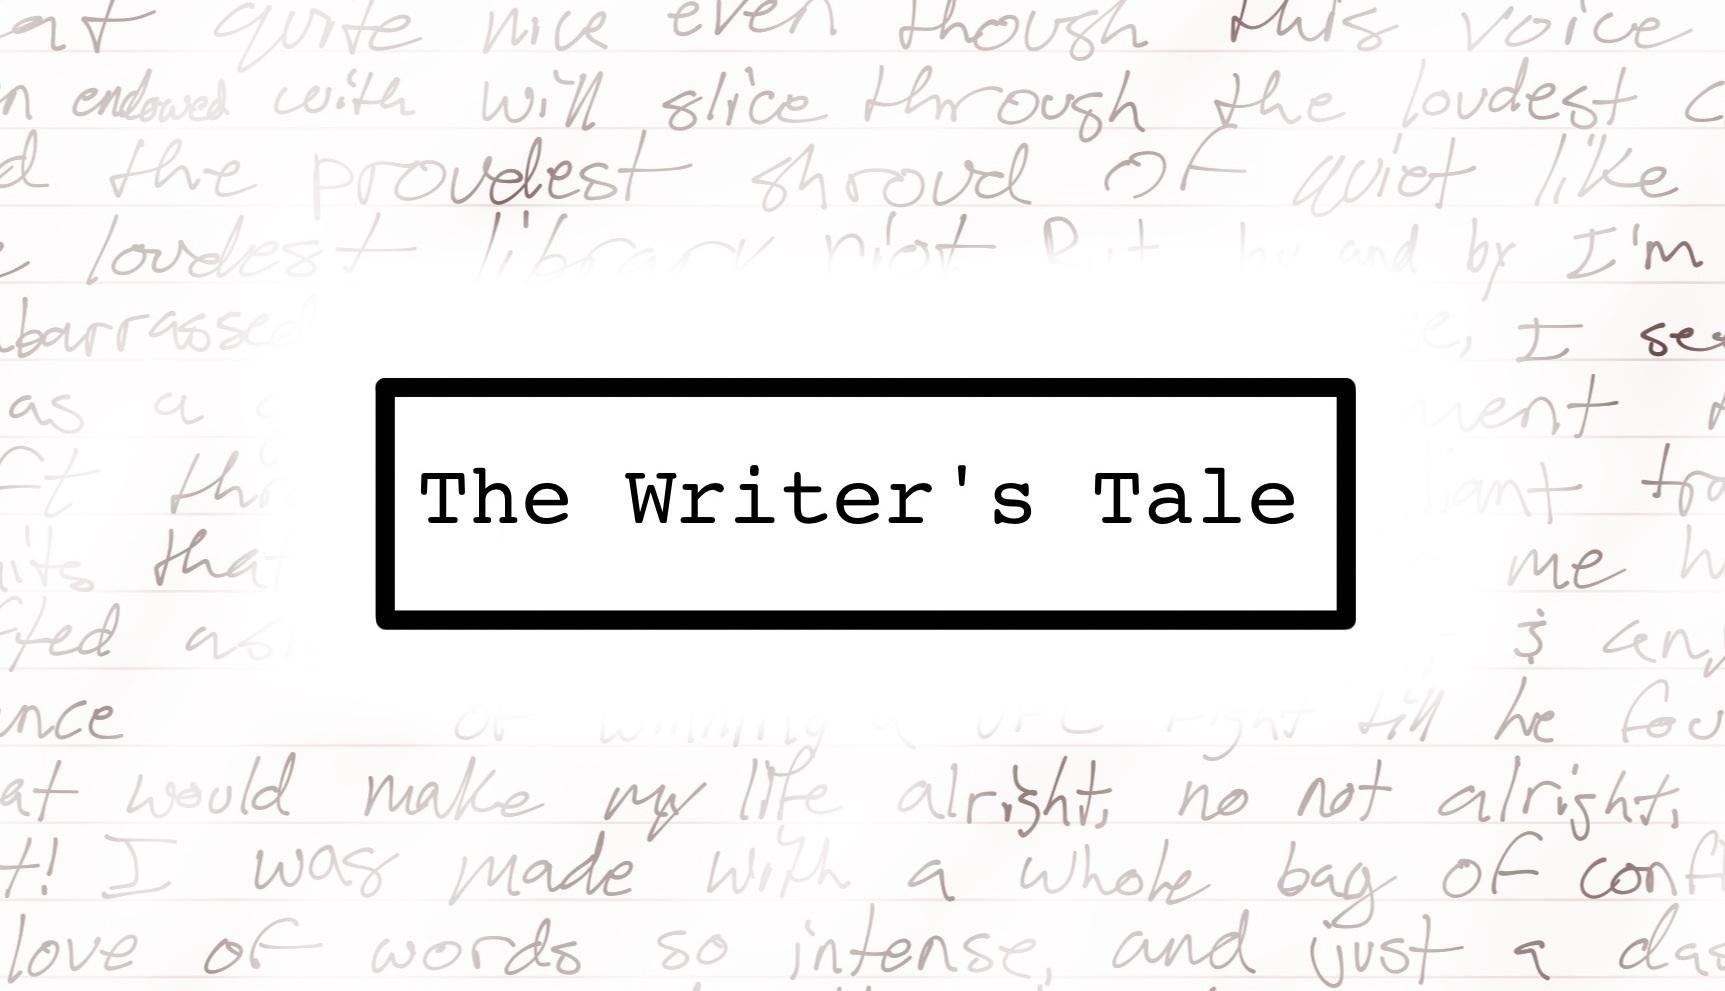 The writers tale - Hannah Wiles excerpt